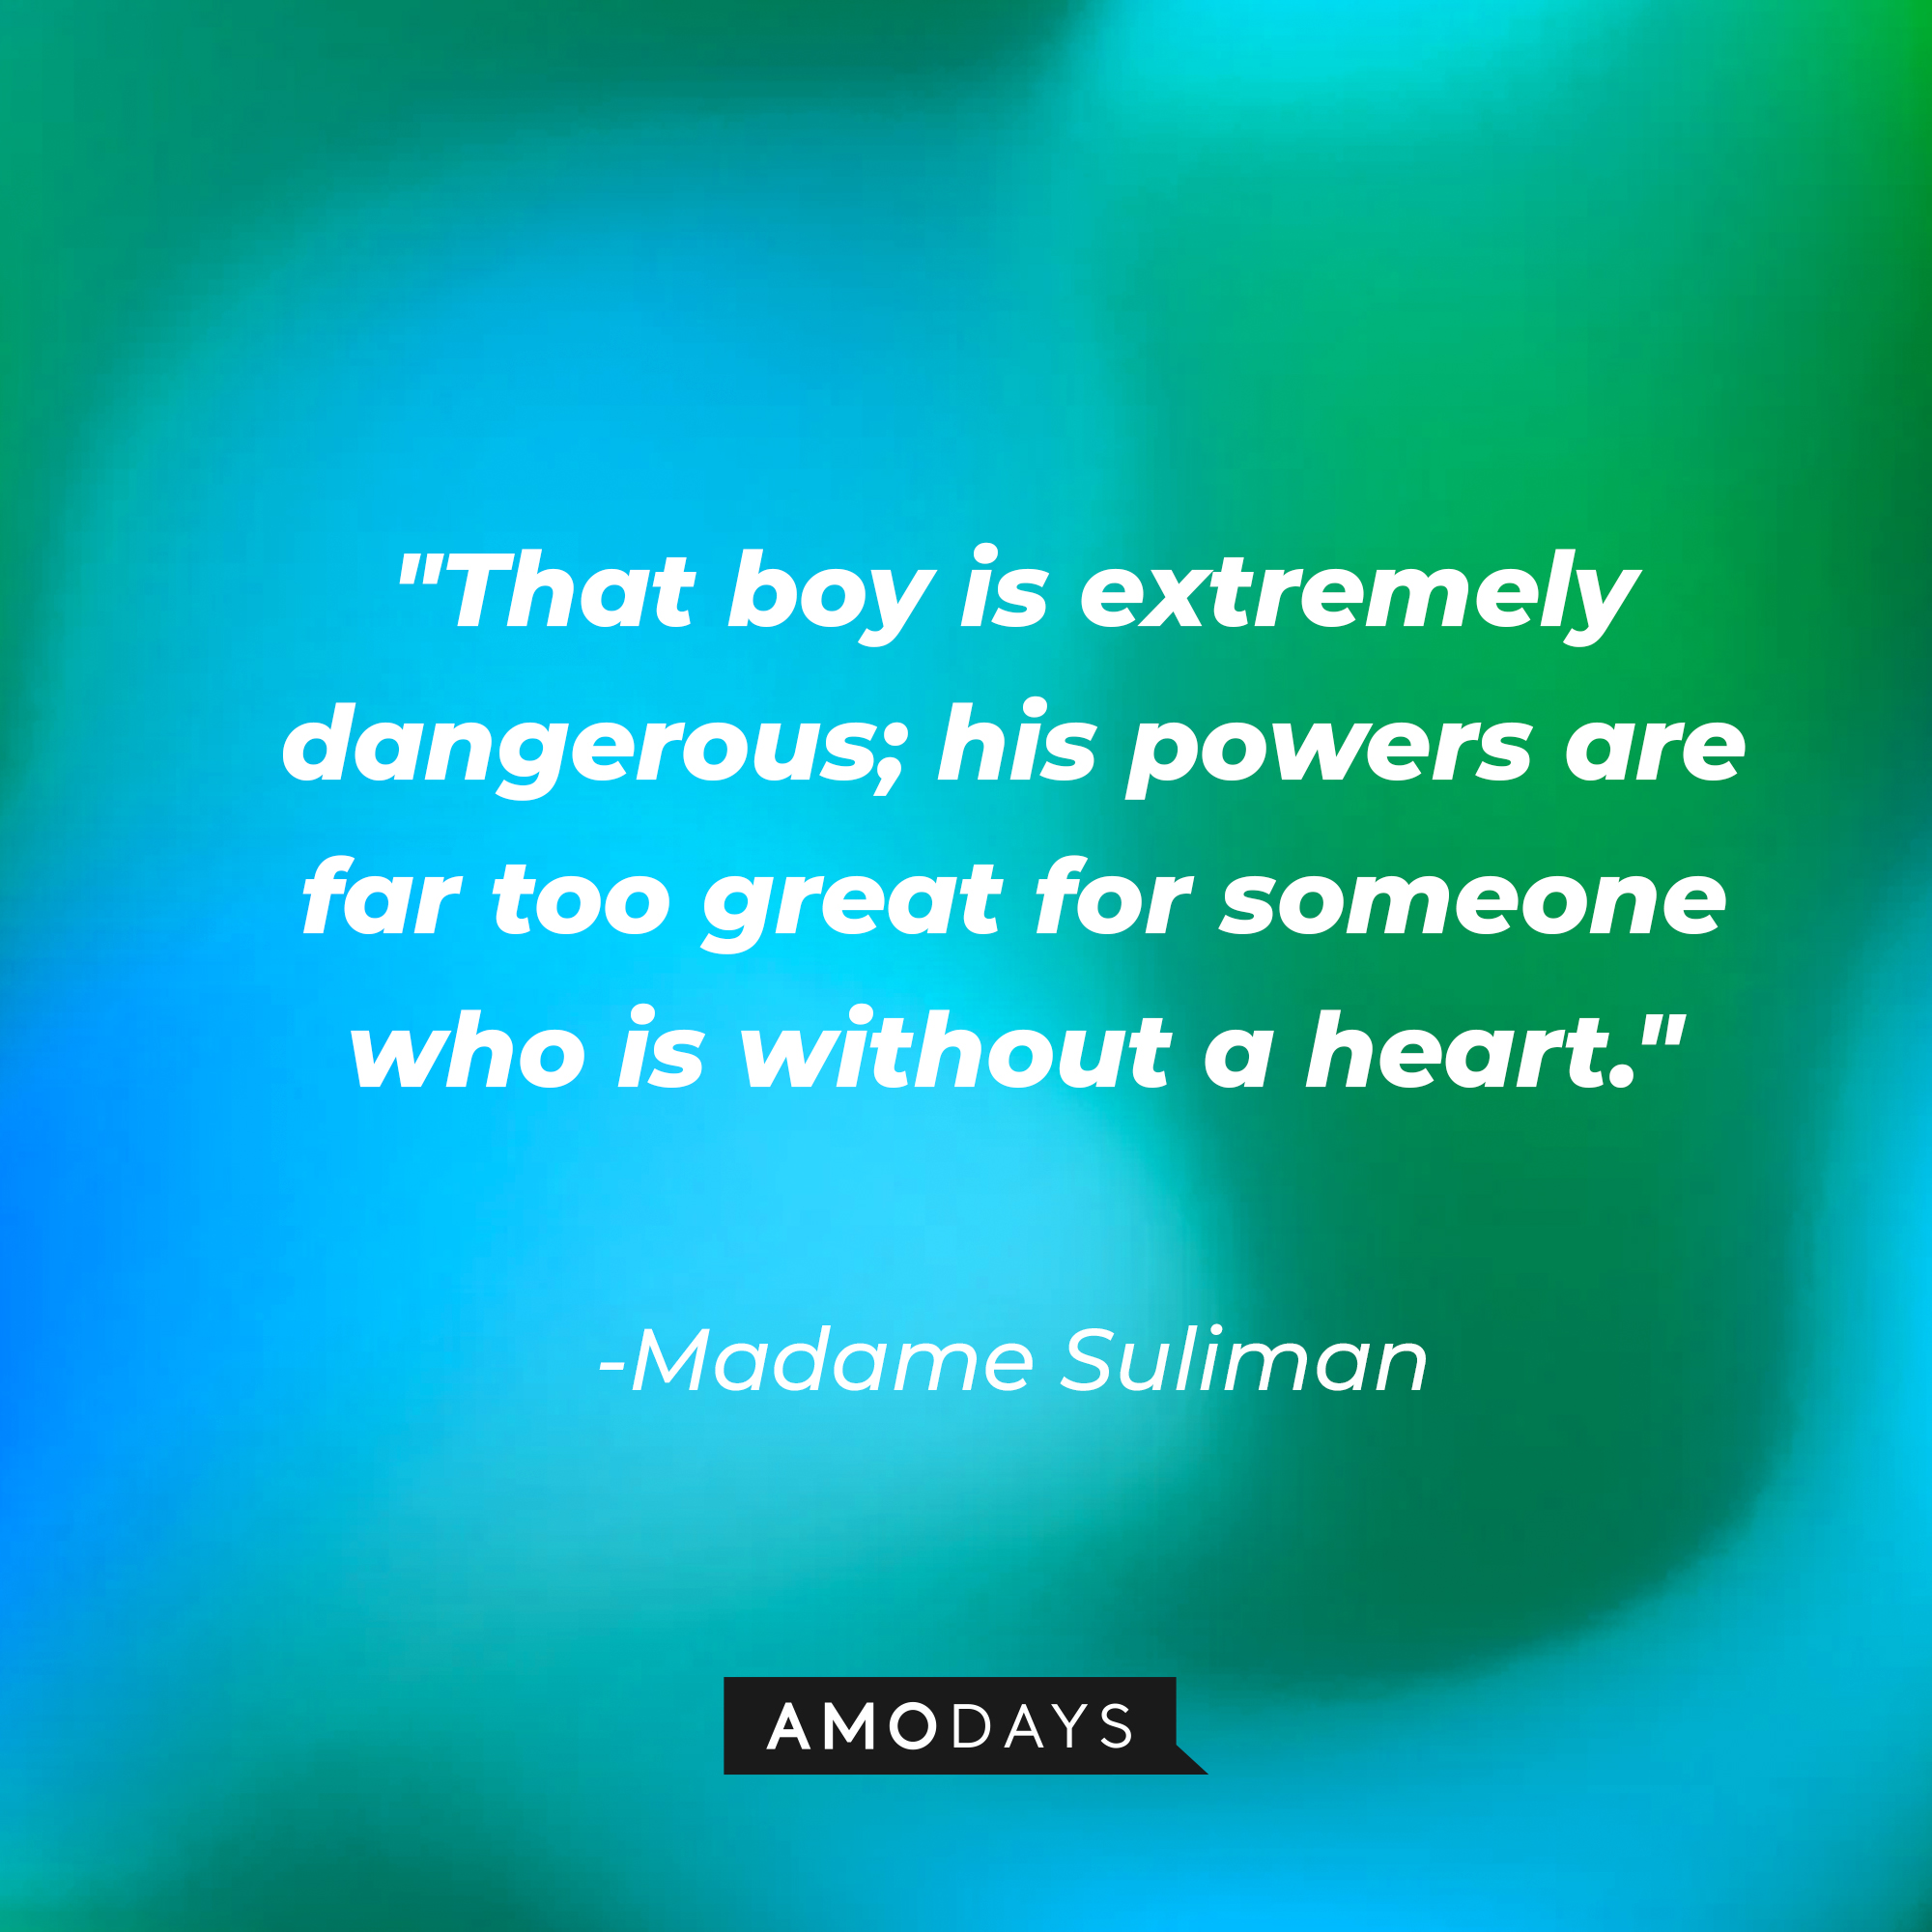 Madame Suliman's quote: "That boy is extremely dangerous; his powers are far too great for someone who is without a heart." | Source: Amodays